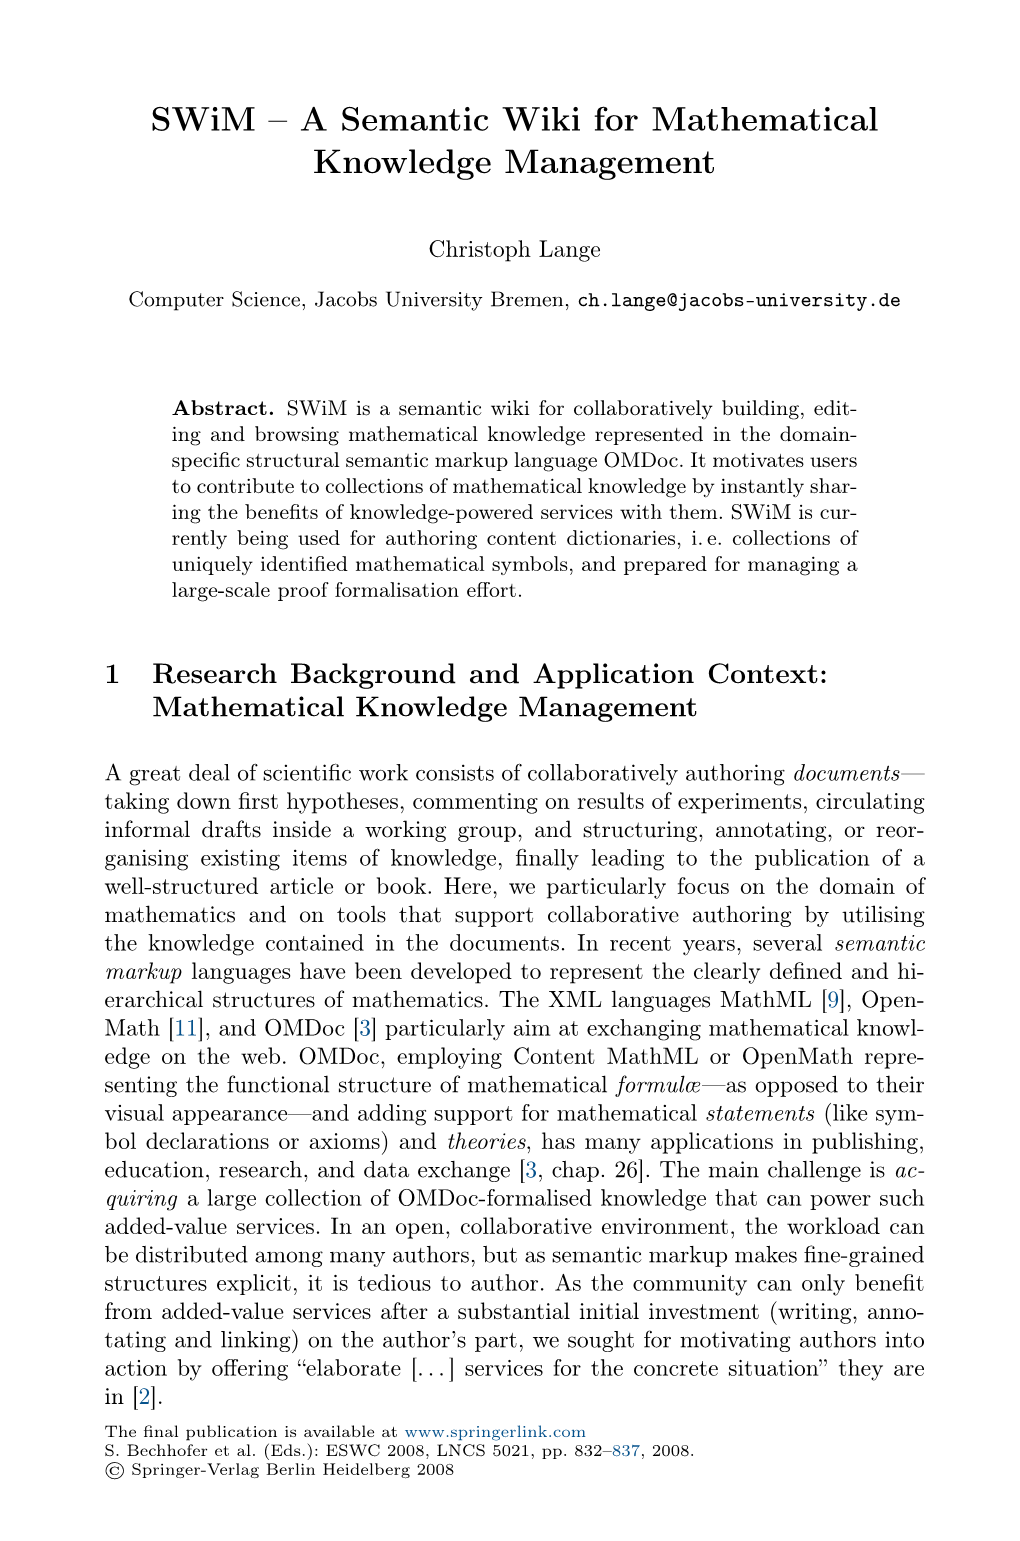 A Semantic Wiki for Mathematical Knowledge Management